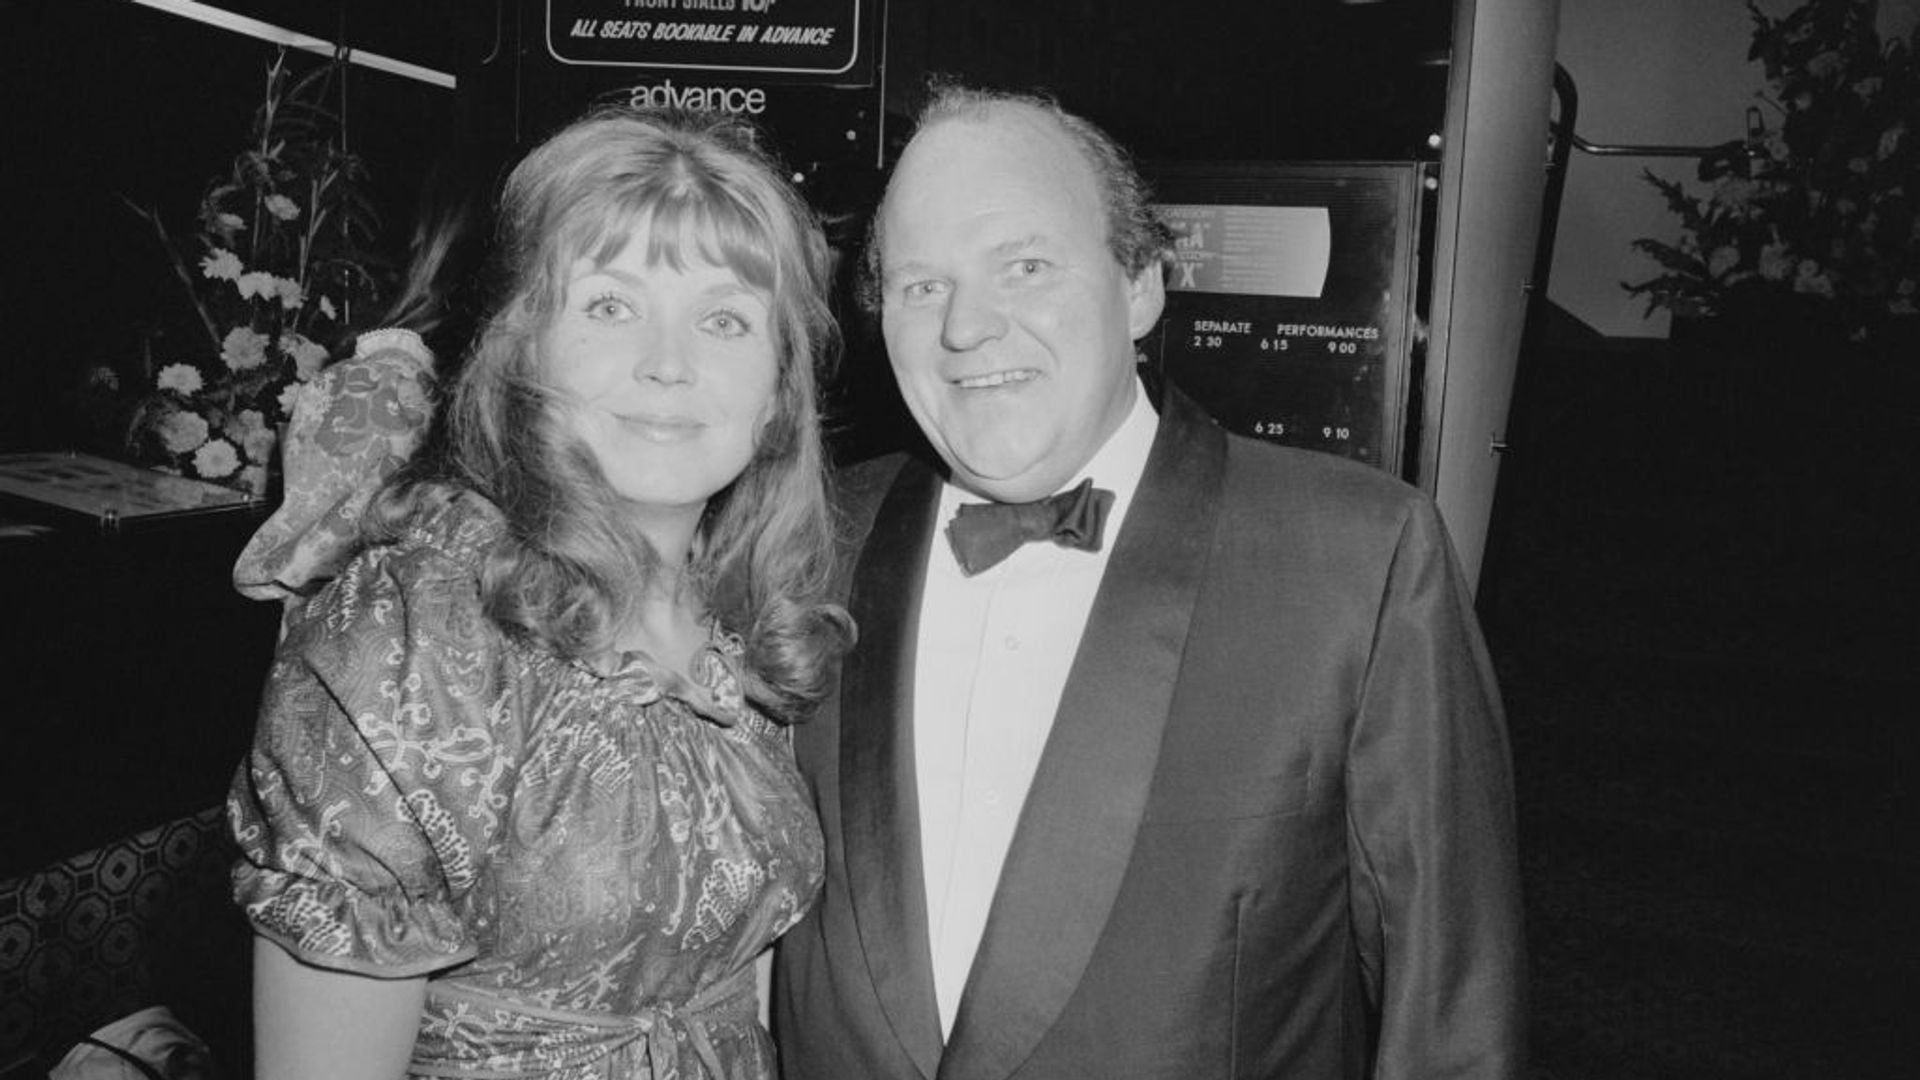 Roy Kinnear with wife Carmel Cryan at a premiere. He is wearing a tux. 